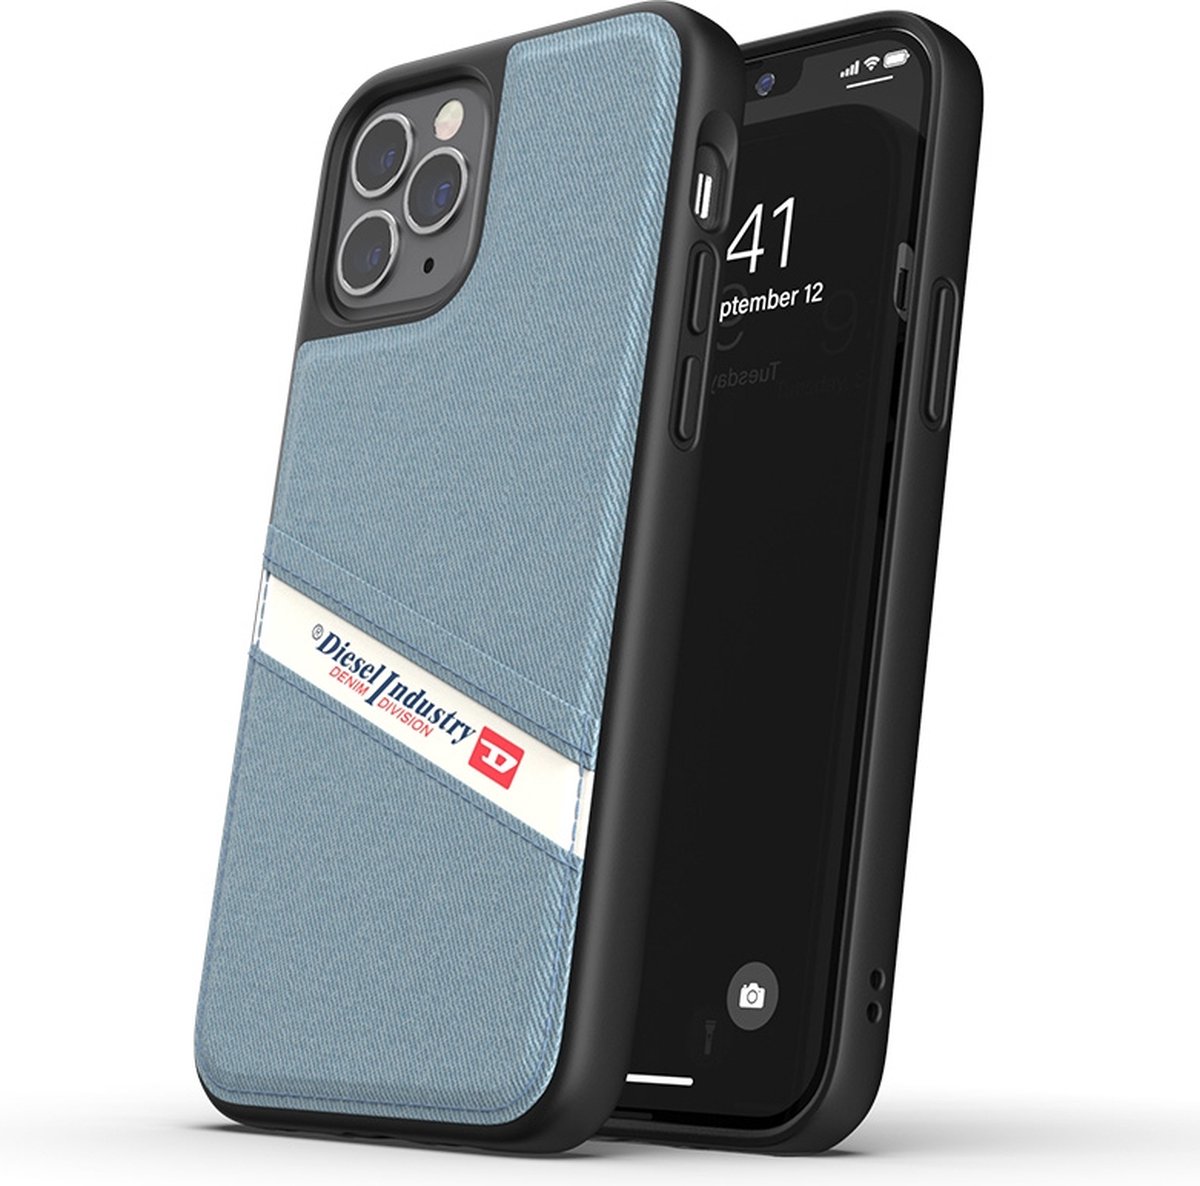 Diesel - Moulded Case iPhone 12 / 12 Pro 6.1 inch | Blauw